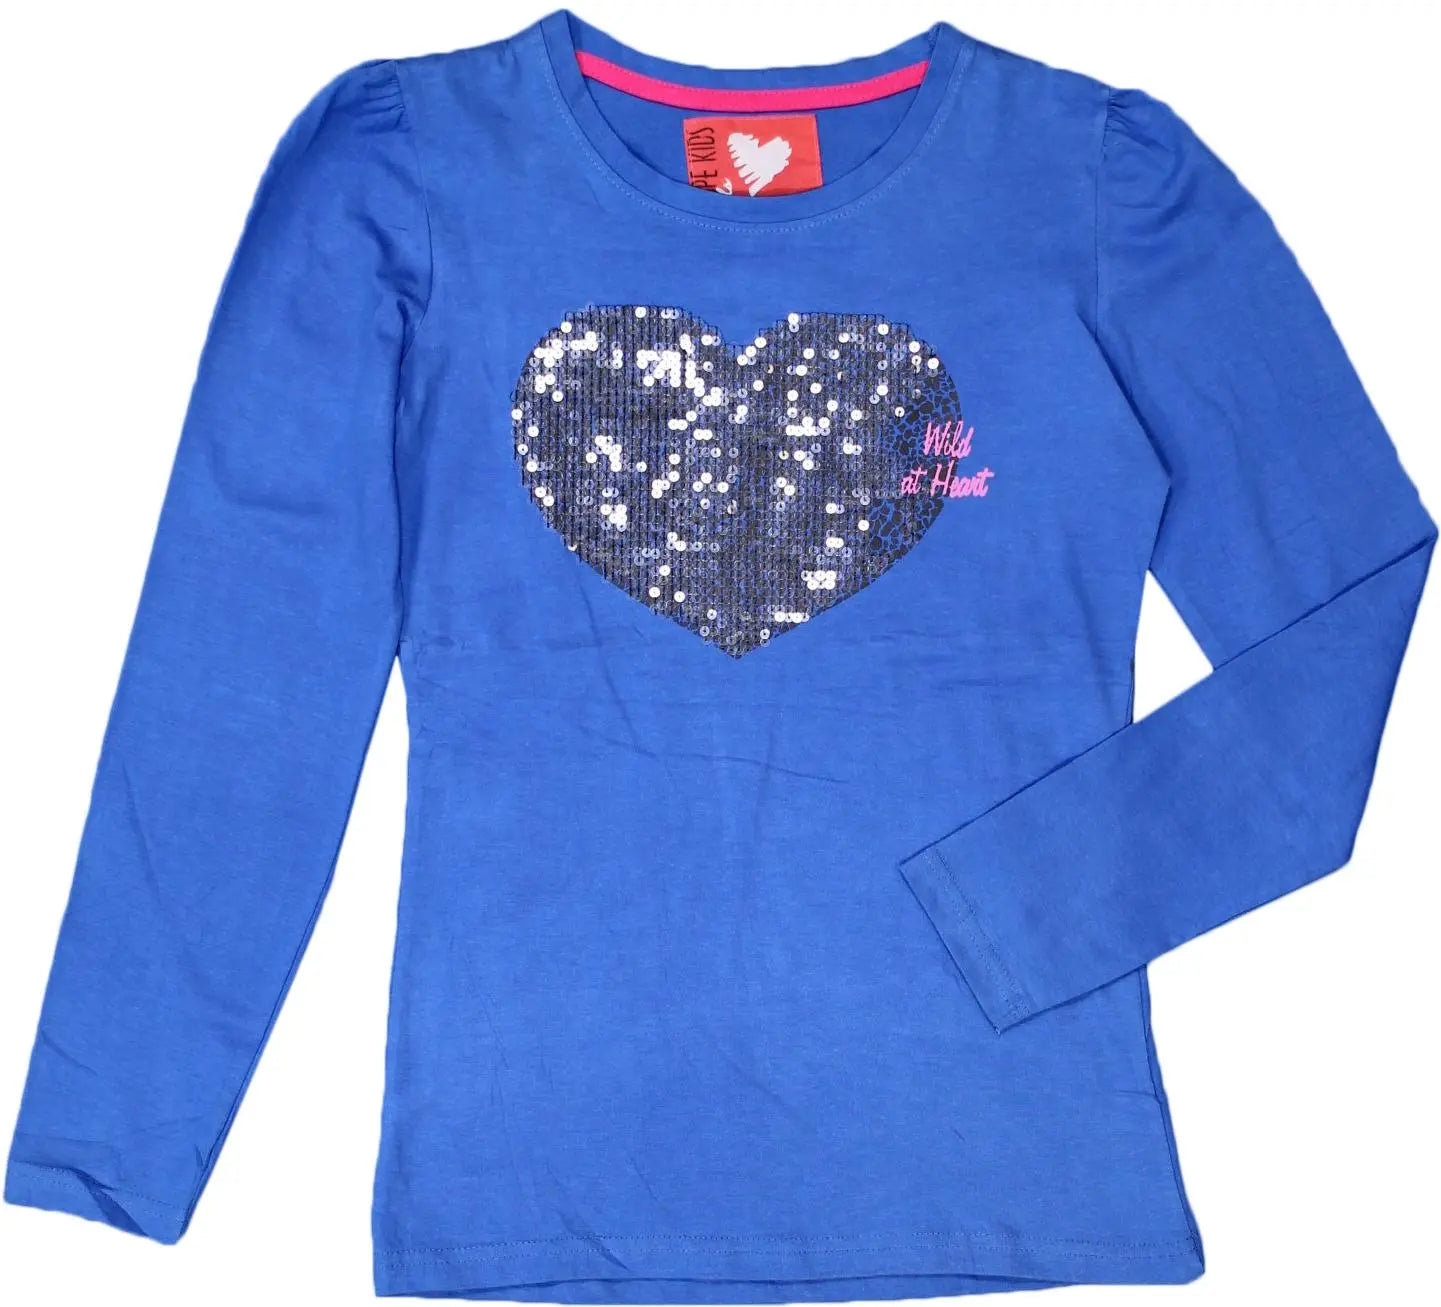 Europe Kids - PINK1712- ThriftTale.com - Vintage and second handclothing